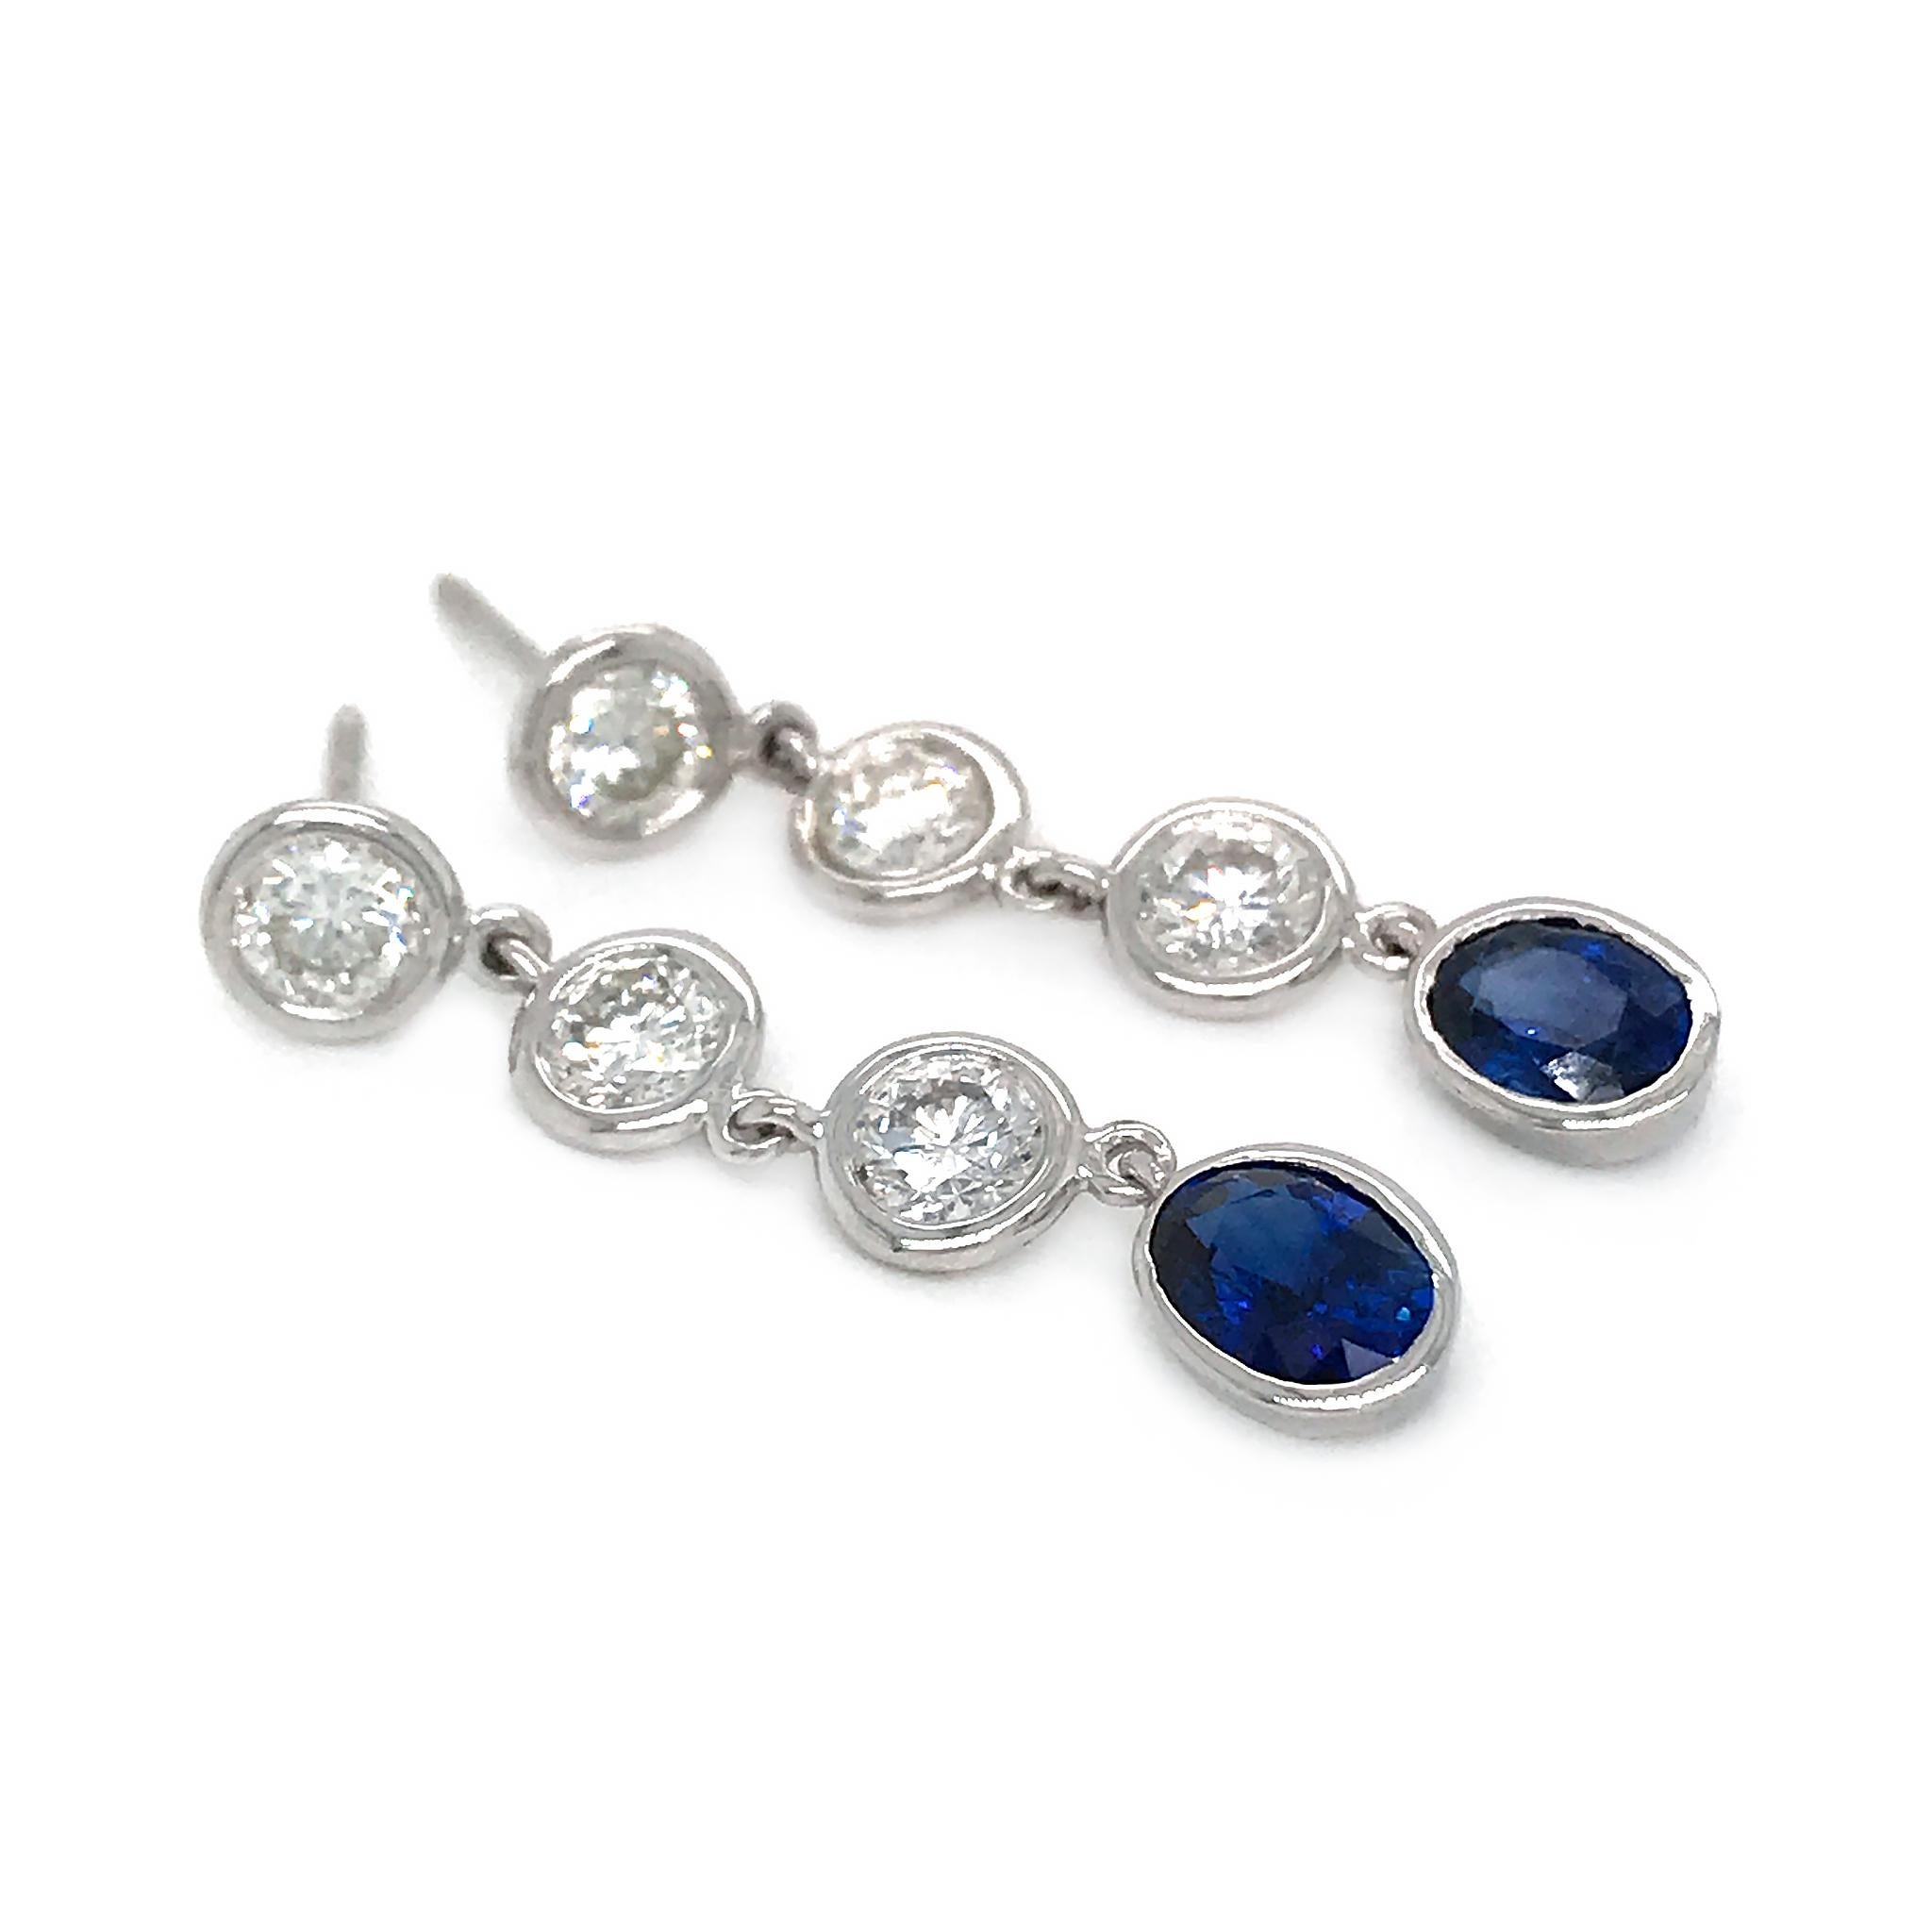 14k White Gold
Diamond: 1.88 ct twd 
Sapphire: 2.10 ct twd 
Total Weight: 3.4 grams
Length: 1.30 inches